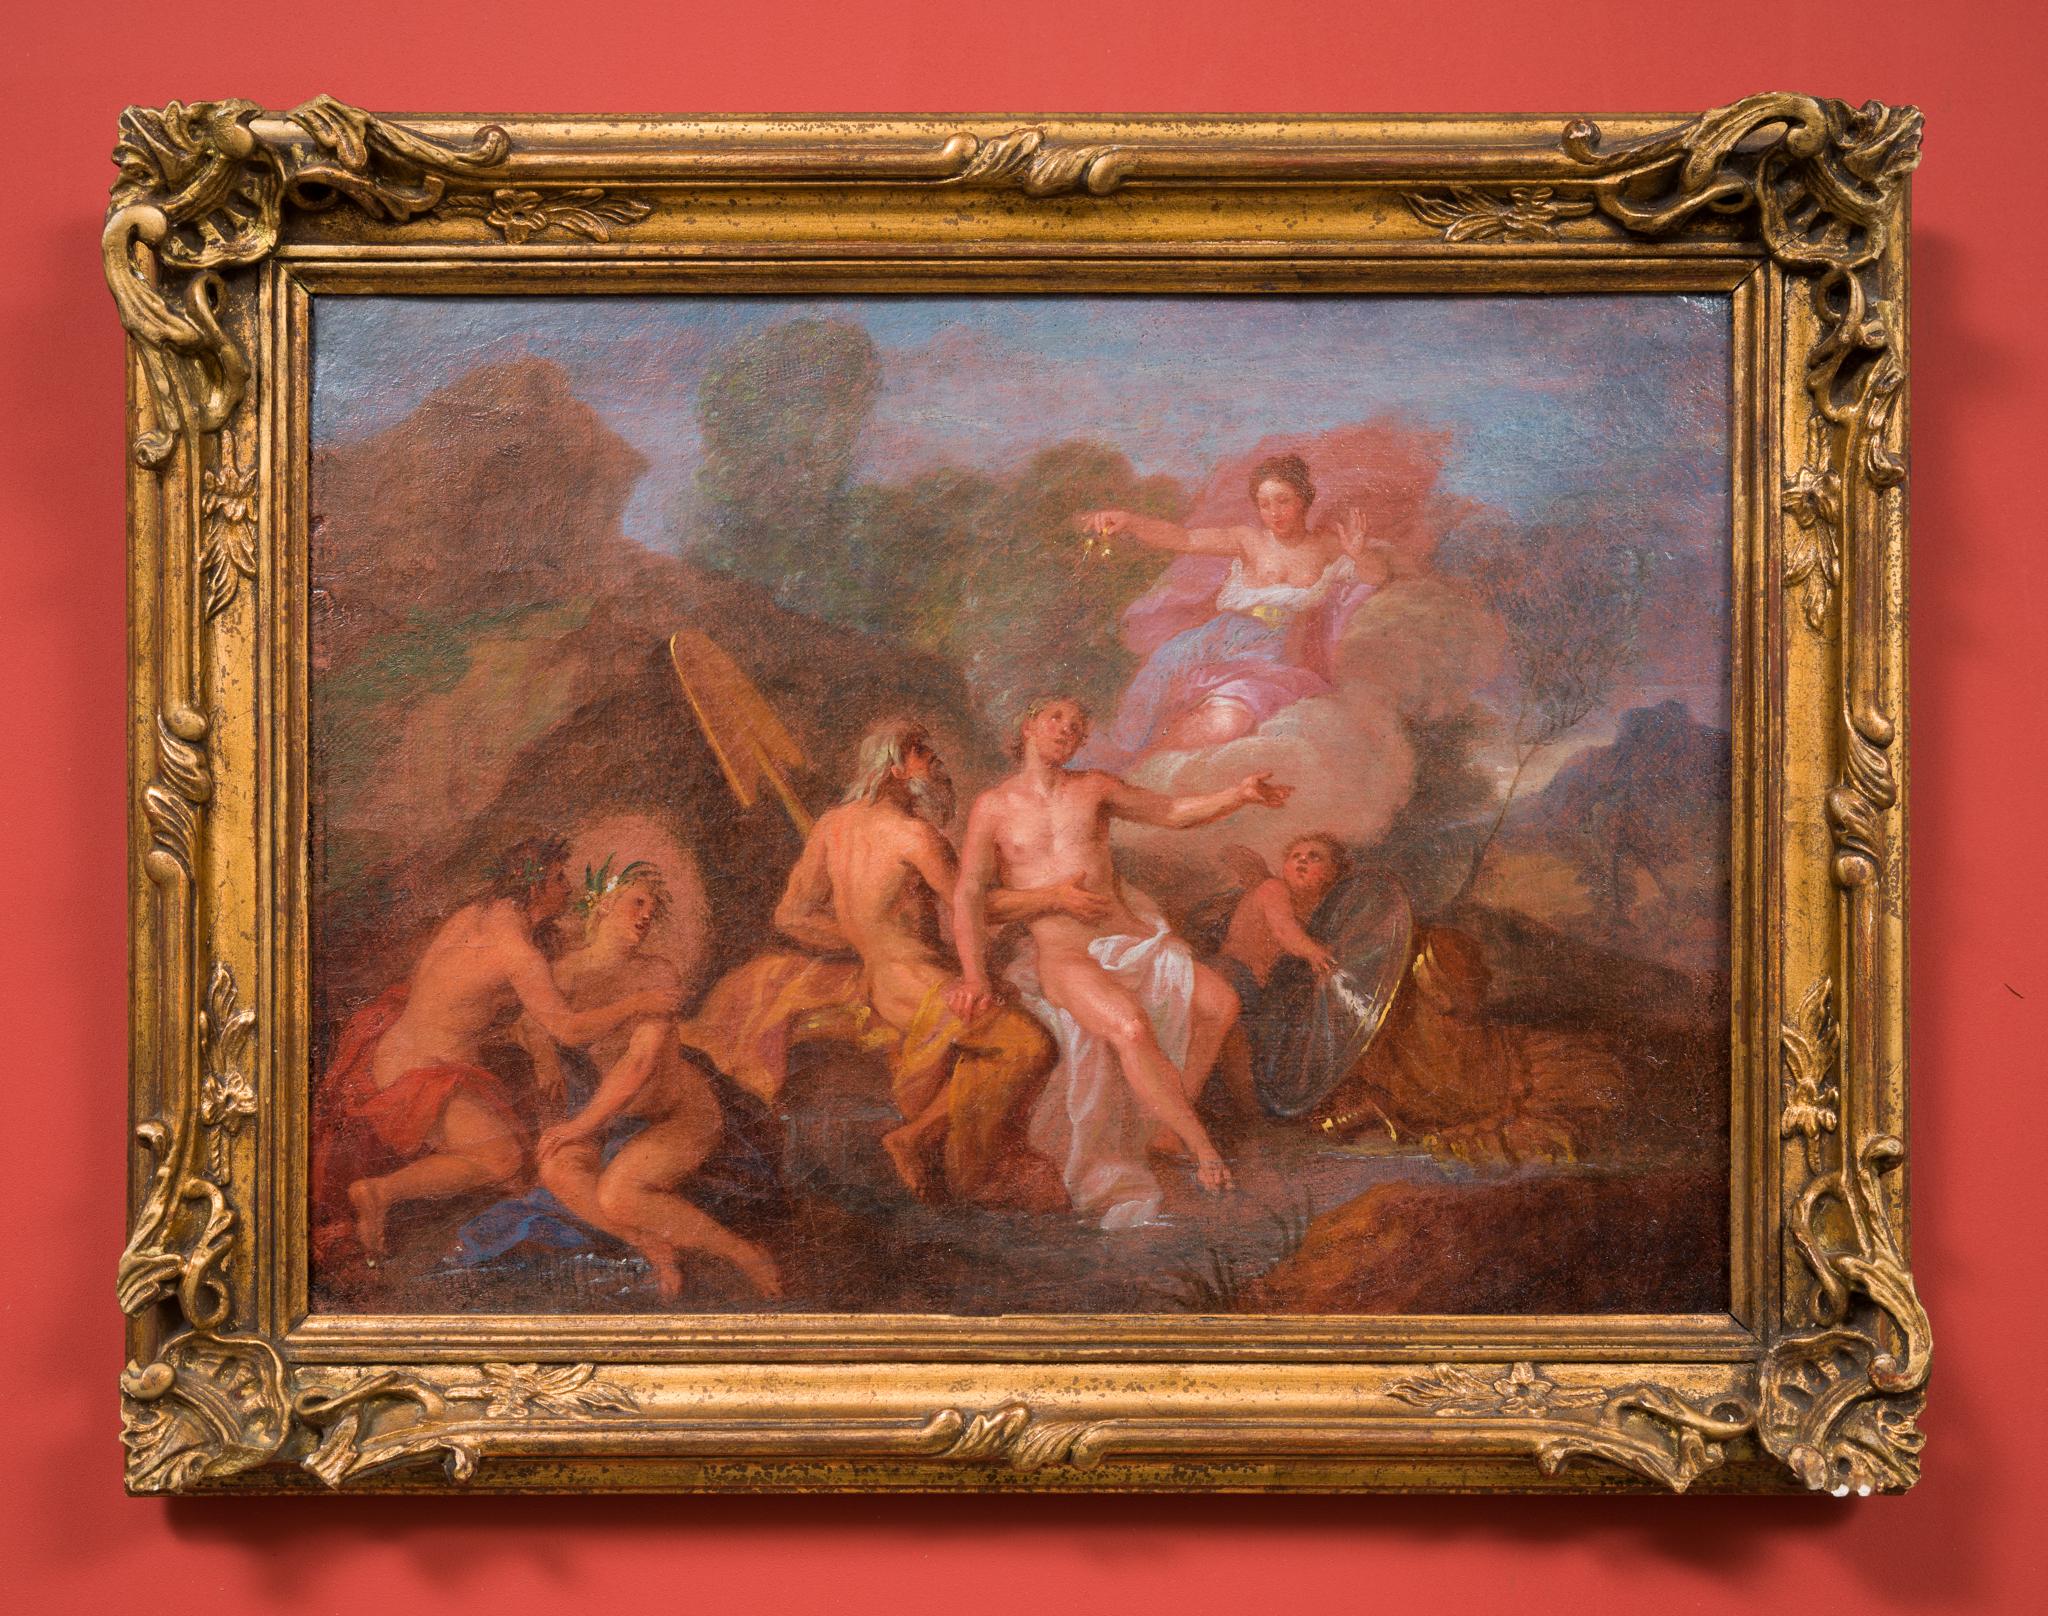 A Mythological Scene, Early 1700s, Oil on Canvas - Painting by Charles Antoine Coypel